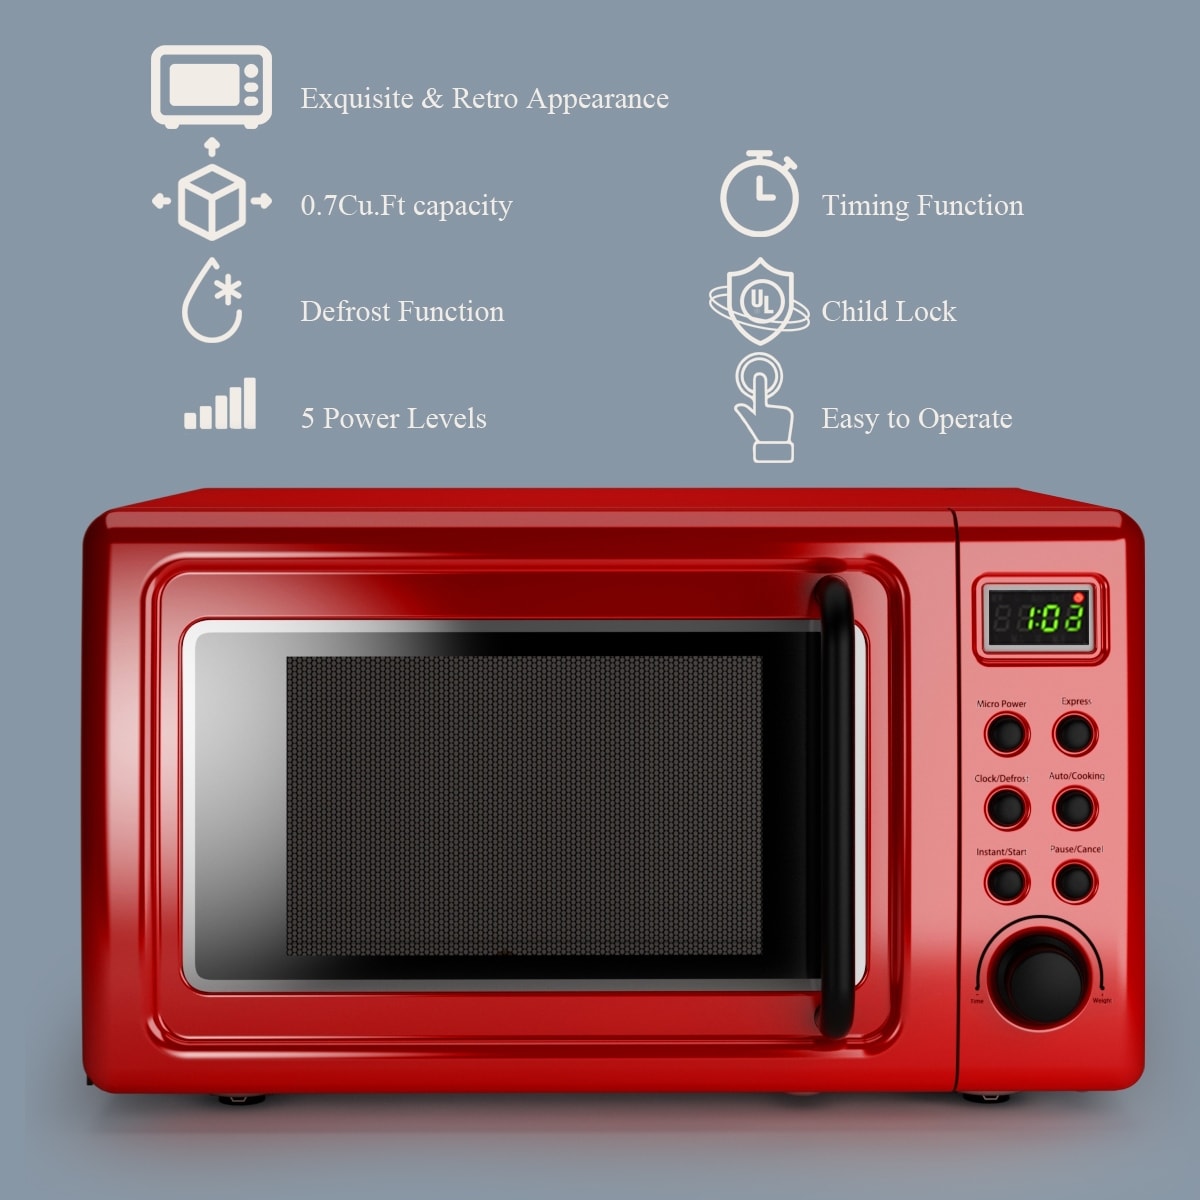 Details about   Countertop 0.7 Cu.ft Digital Kitchen Microwave Oven RV Dorm Mini Small Led RED 